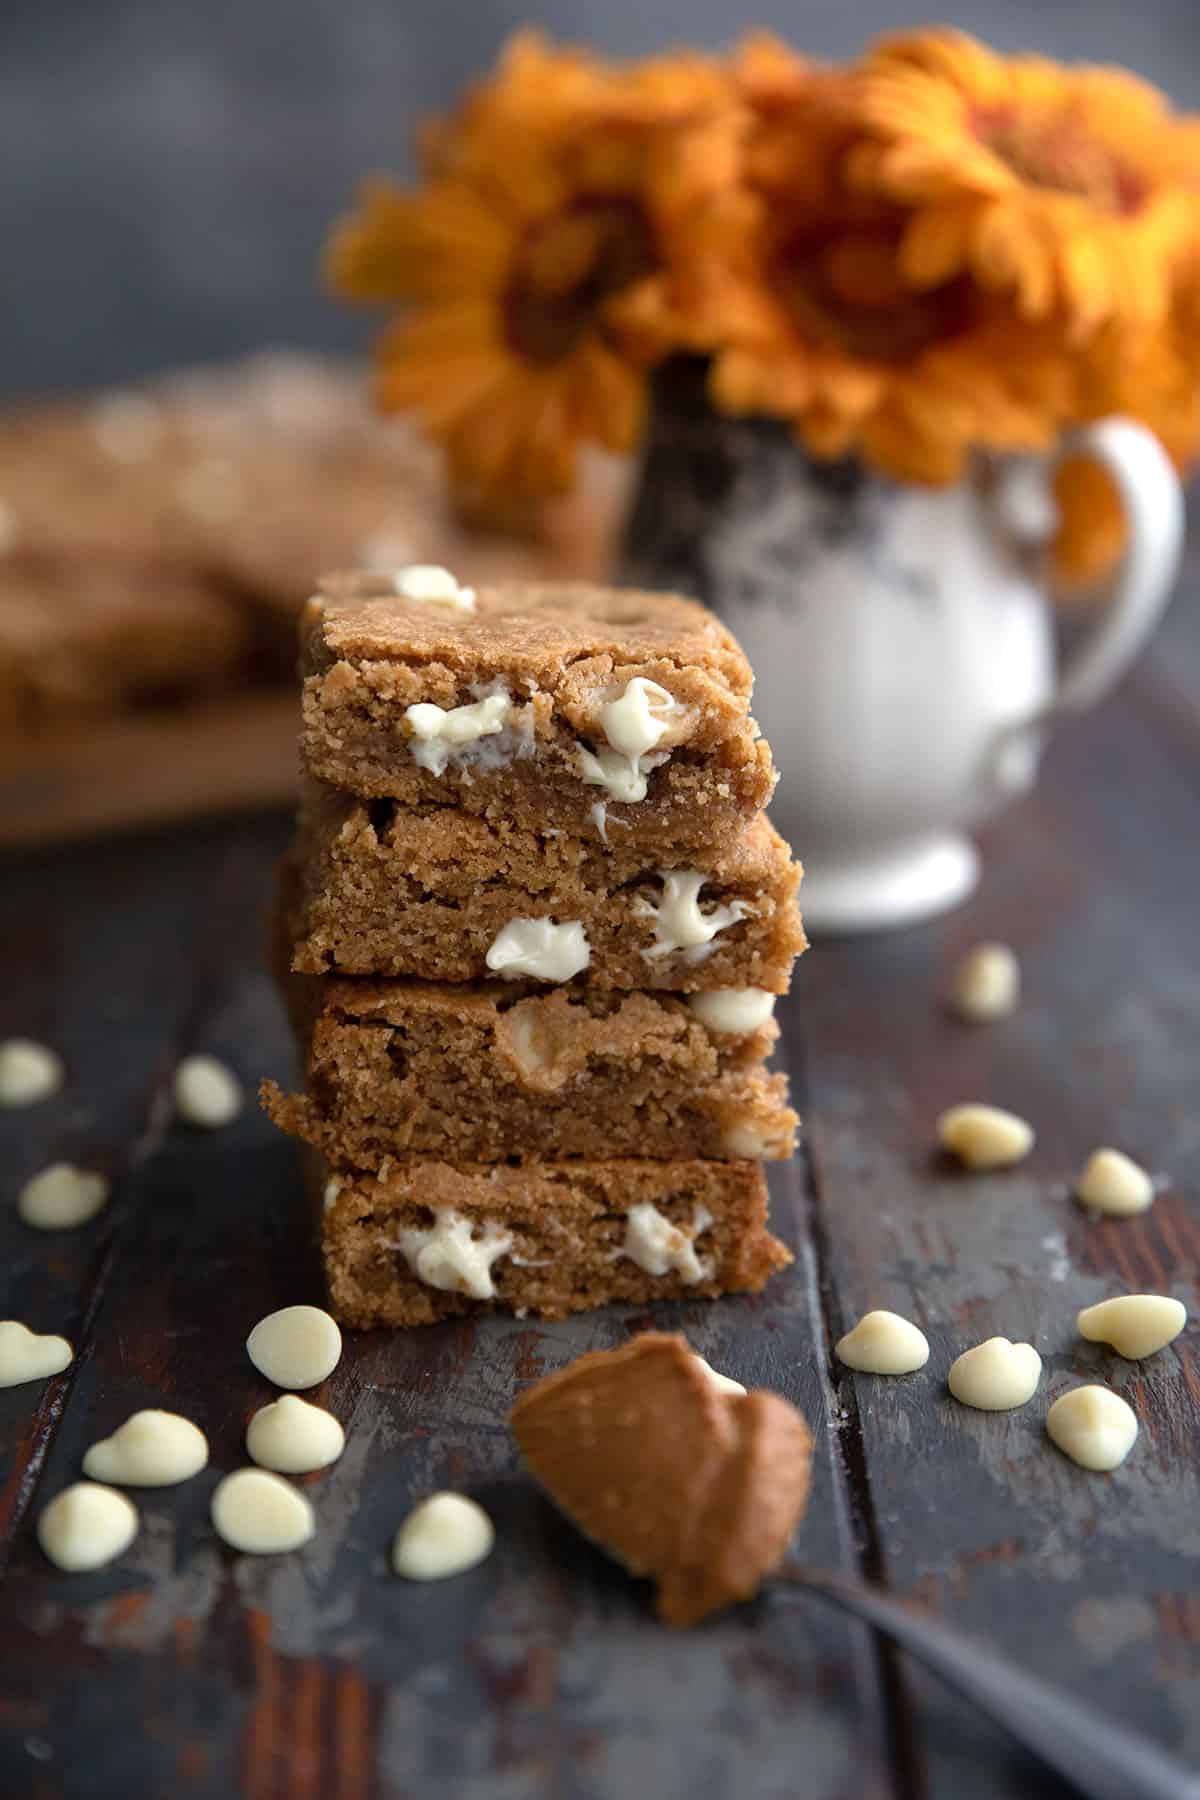 A stack of keto cookie bars with a scoopful of keto cookie butter and some white chocolate chips in front. A vase of orange gerbera daisies in the background.